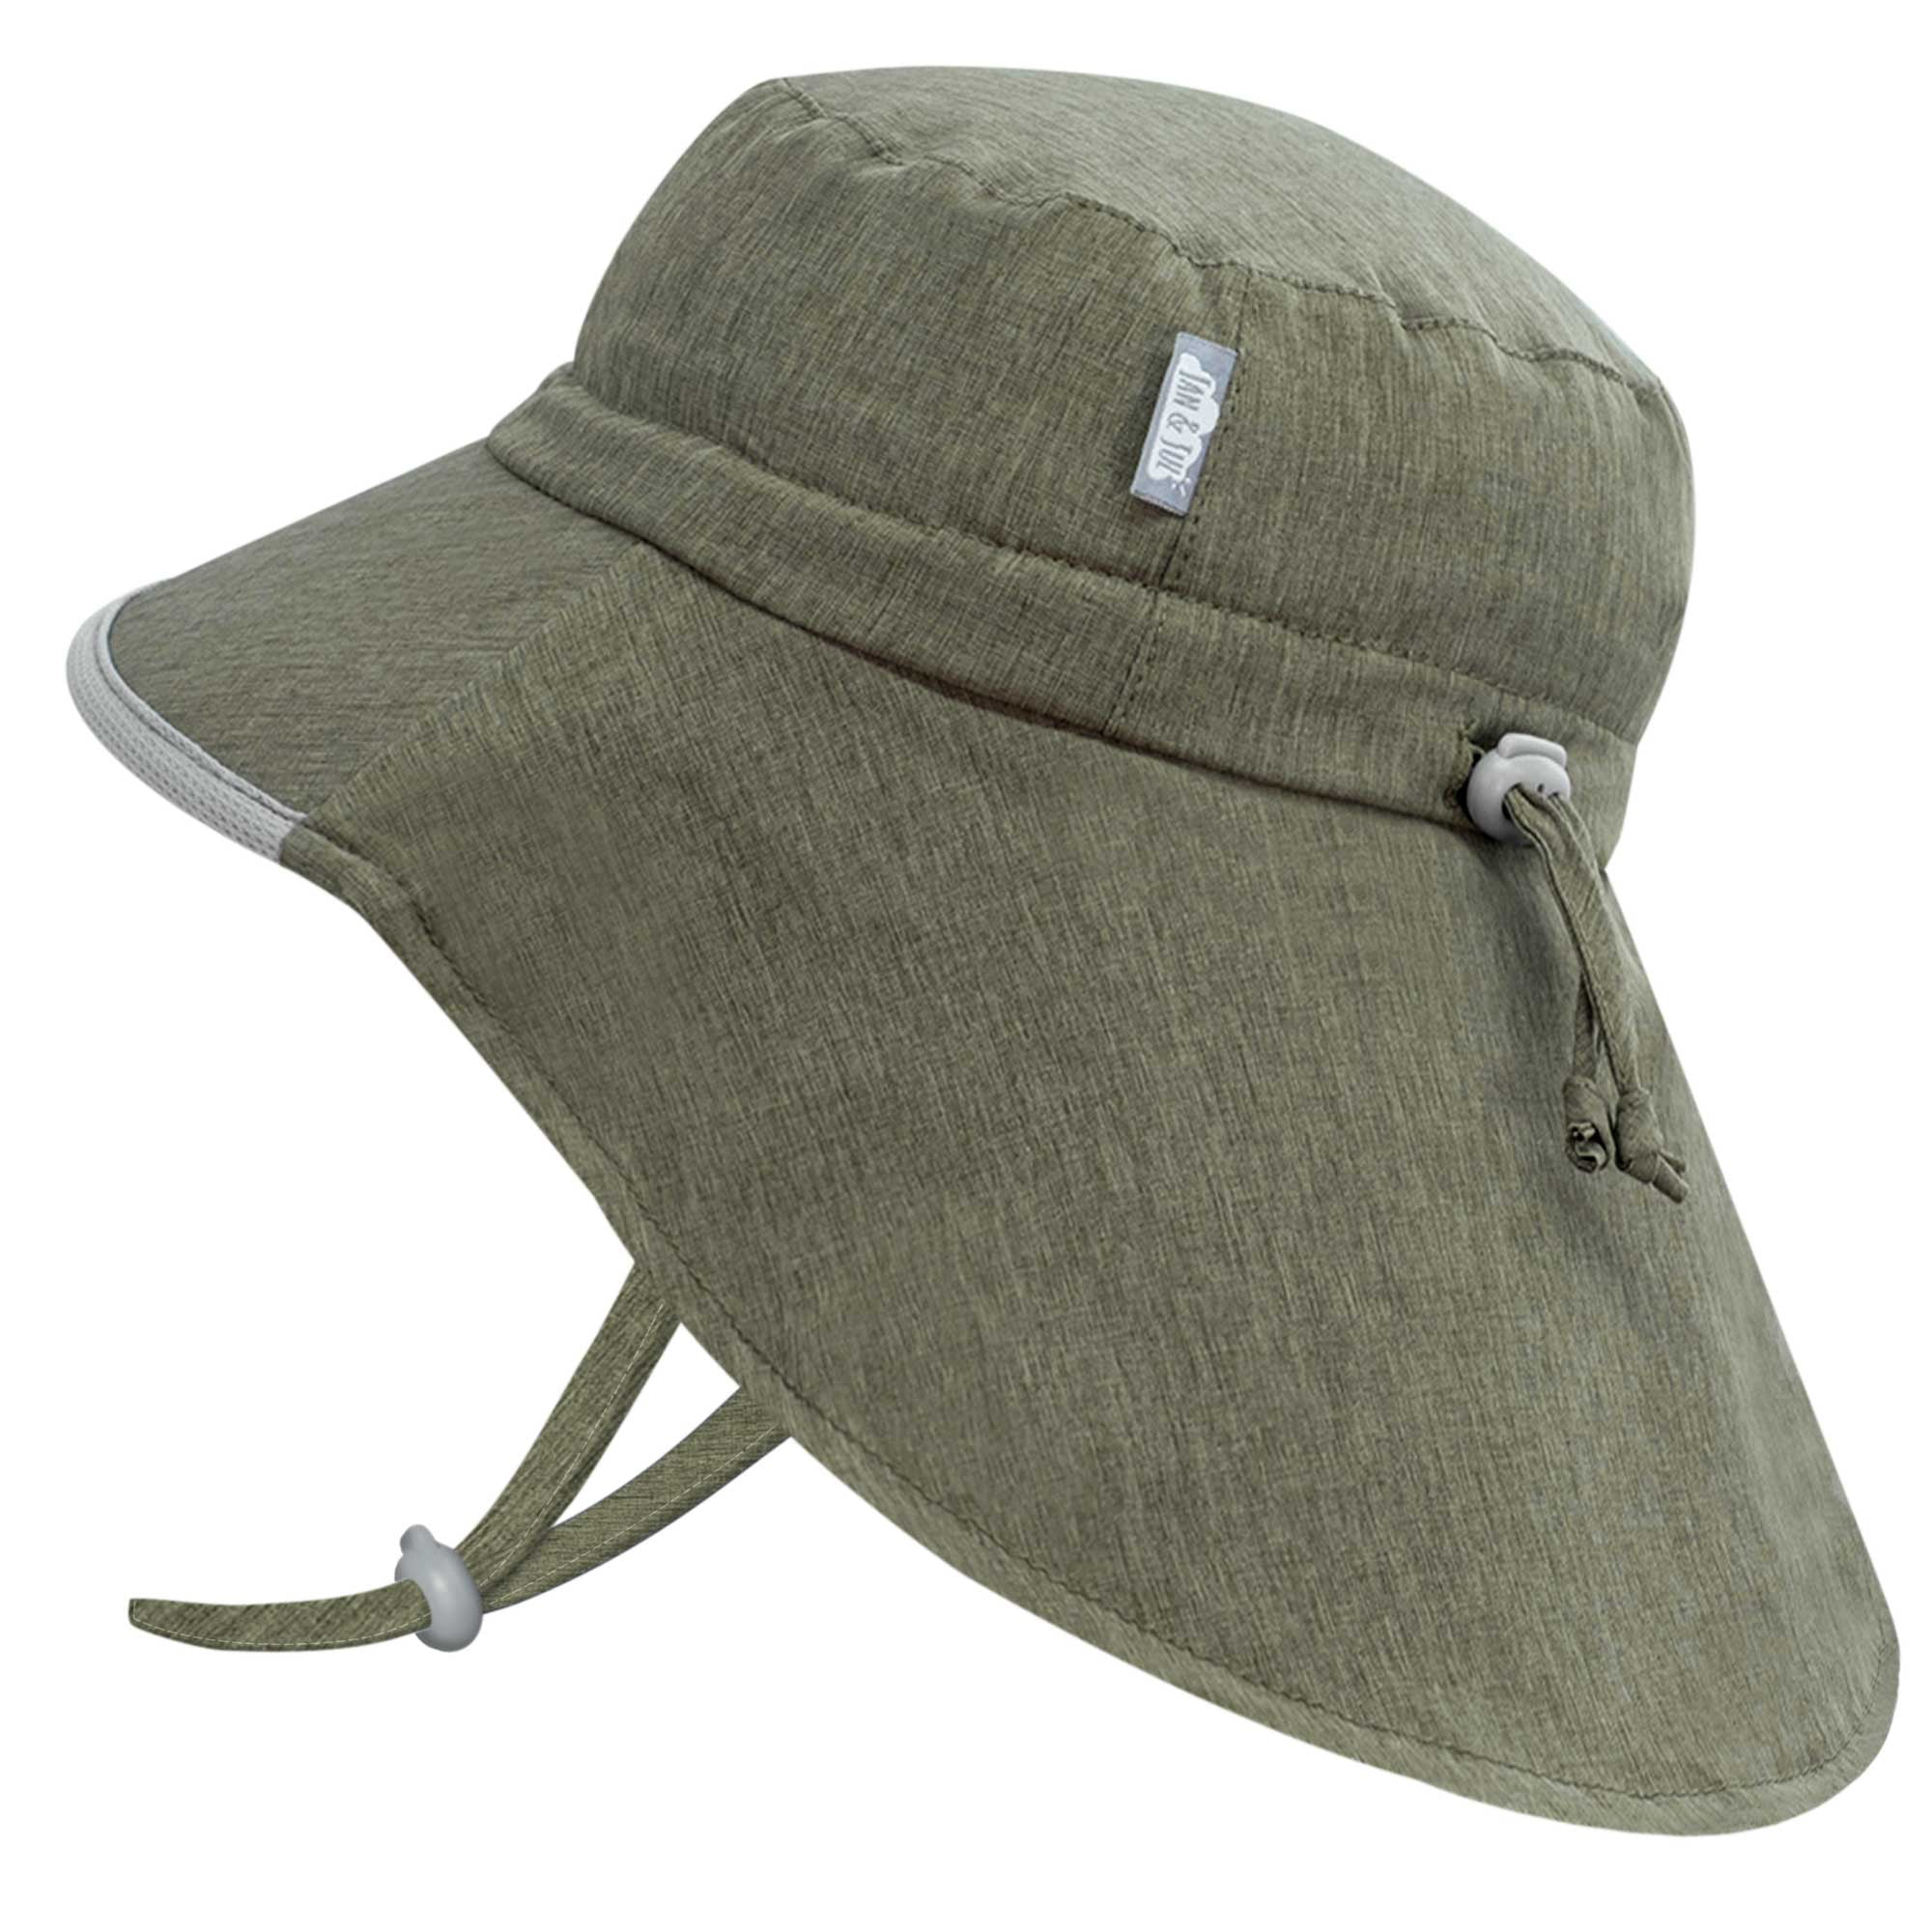 JAN & JUL Summer Adventure Swim Hats for Toddler Boys with Wide Brim (M:  6-24 Months, Army Green)